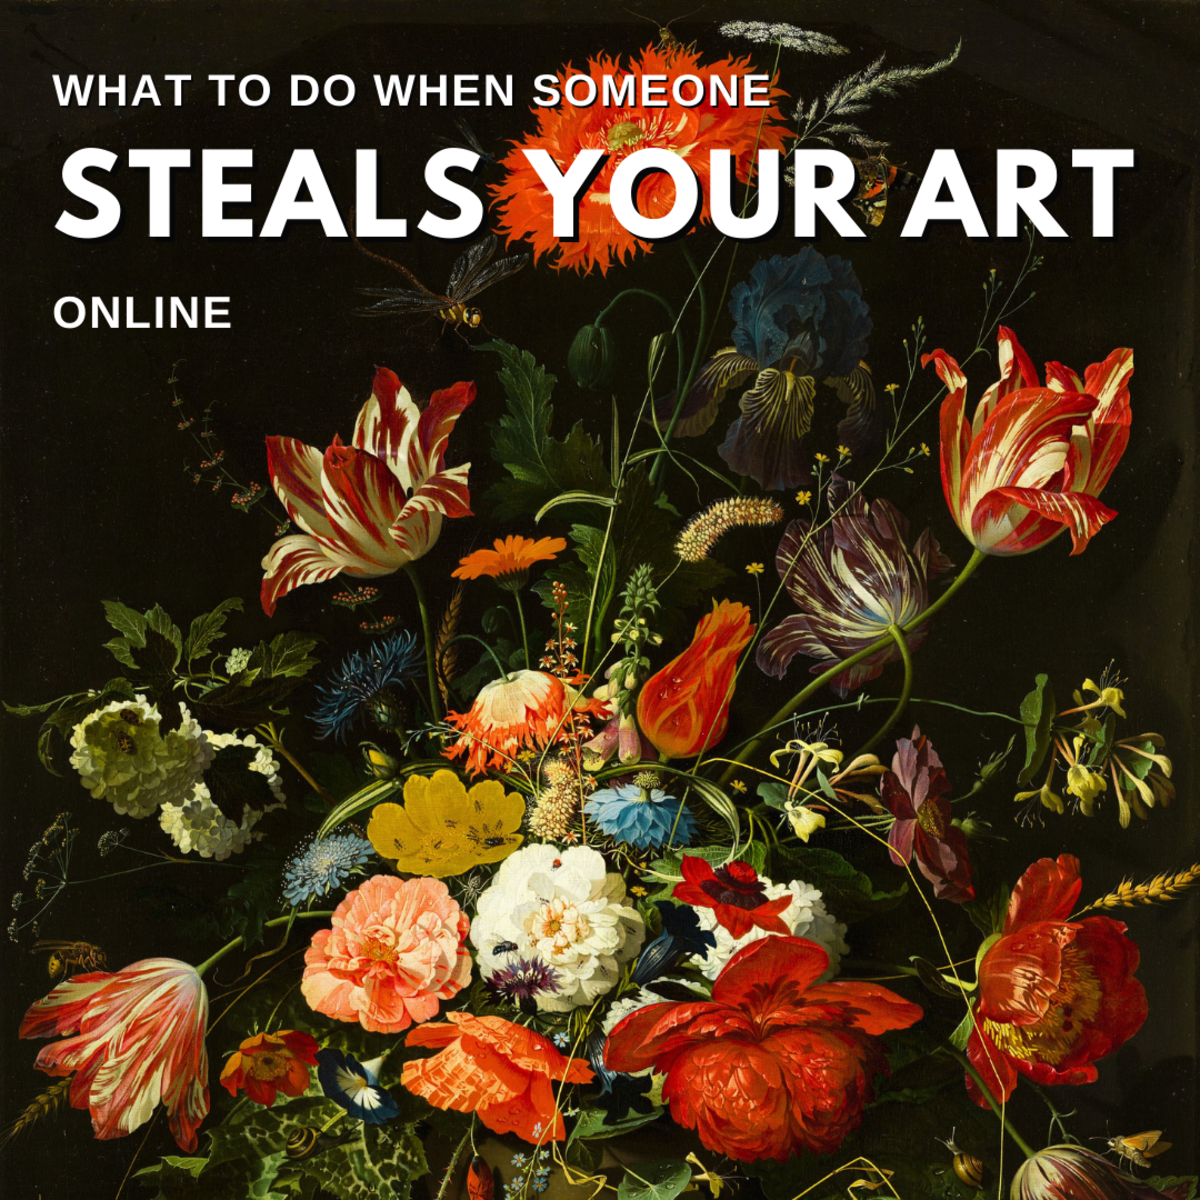 What should you do when someone steals your art online?